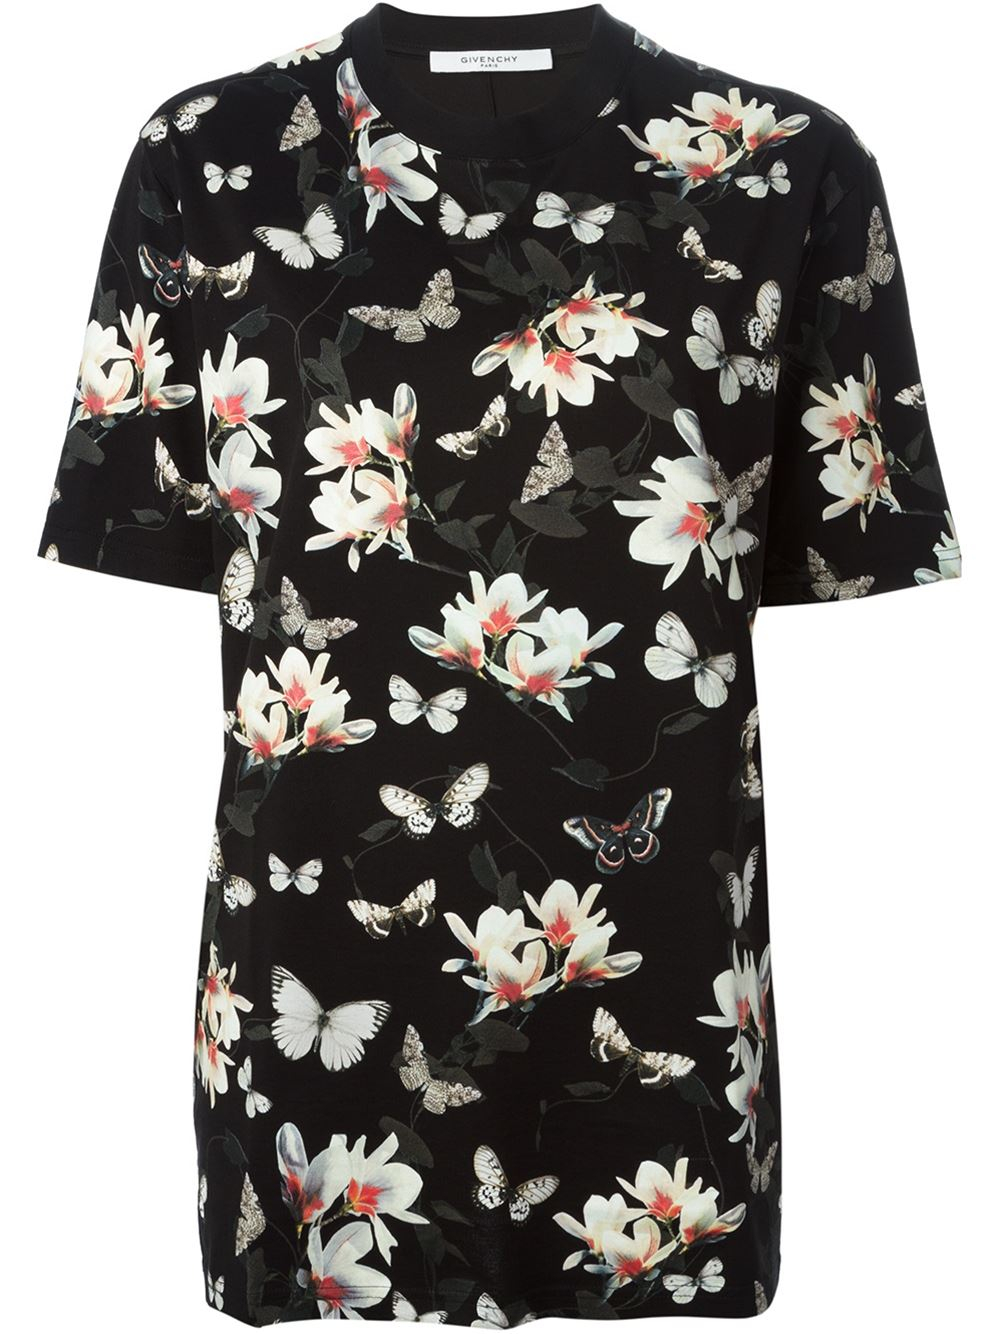 Givenchy Floral Print T-Shirt in Floral (black) | Lyst